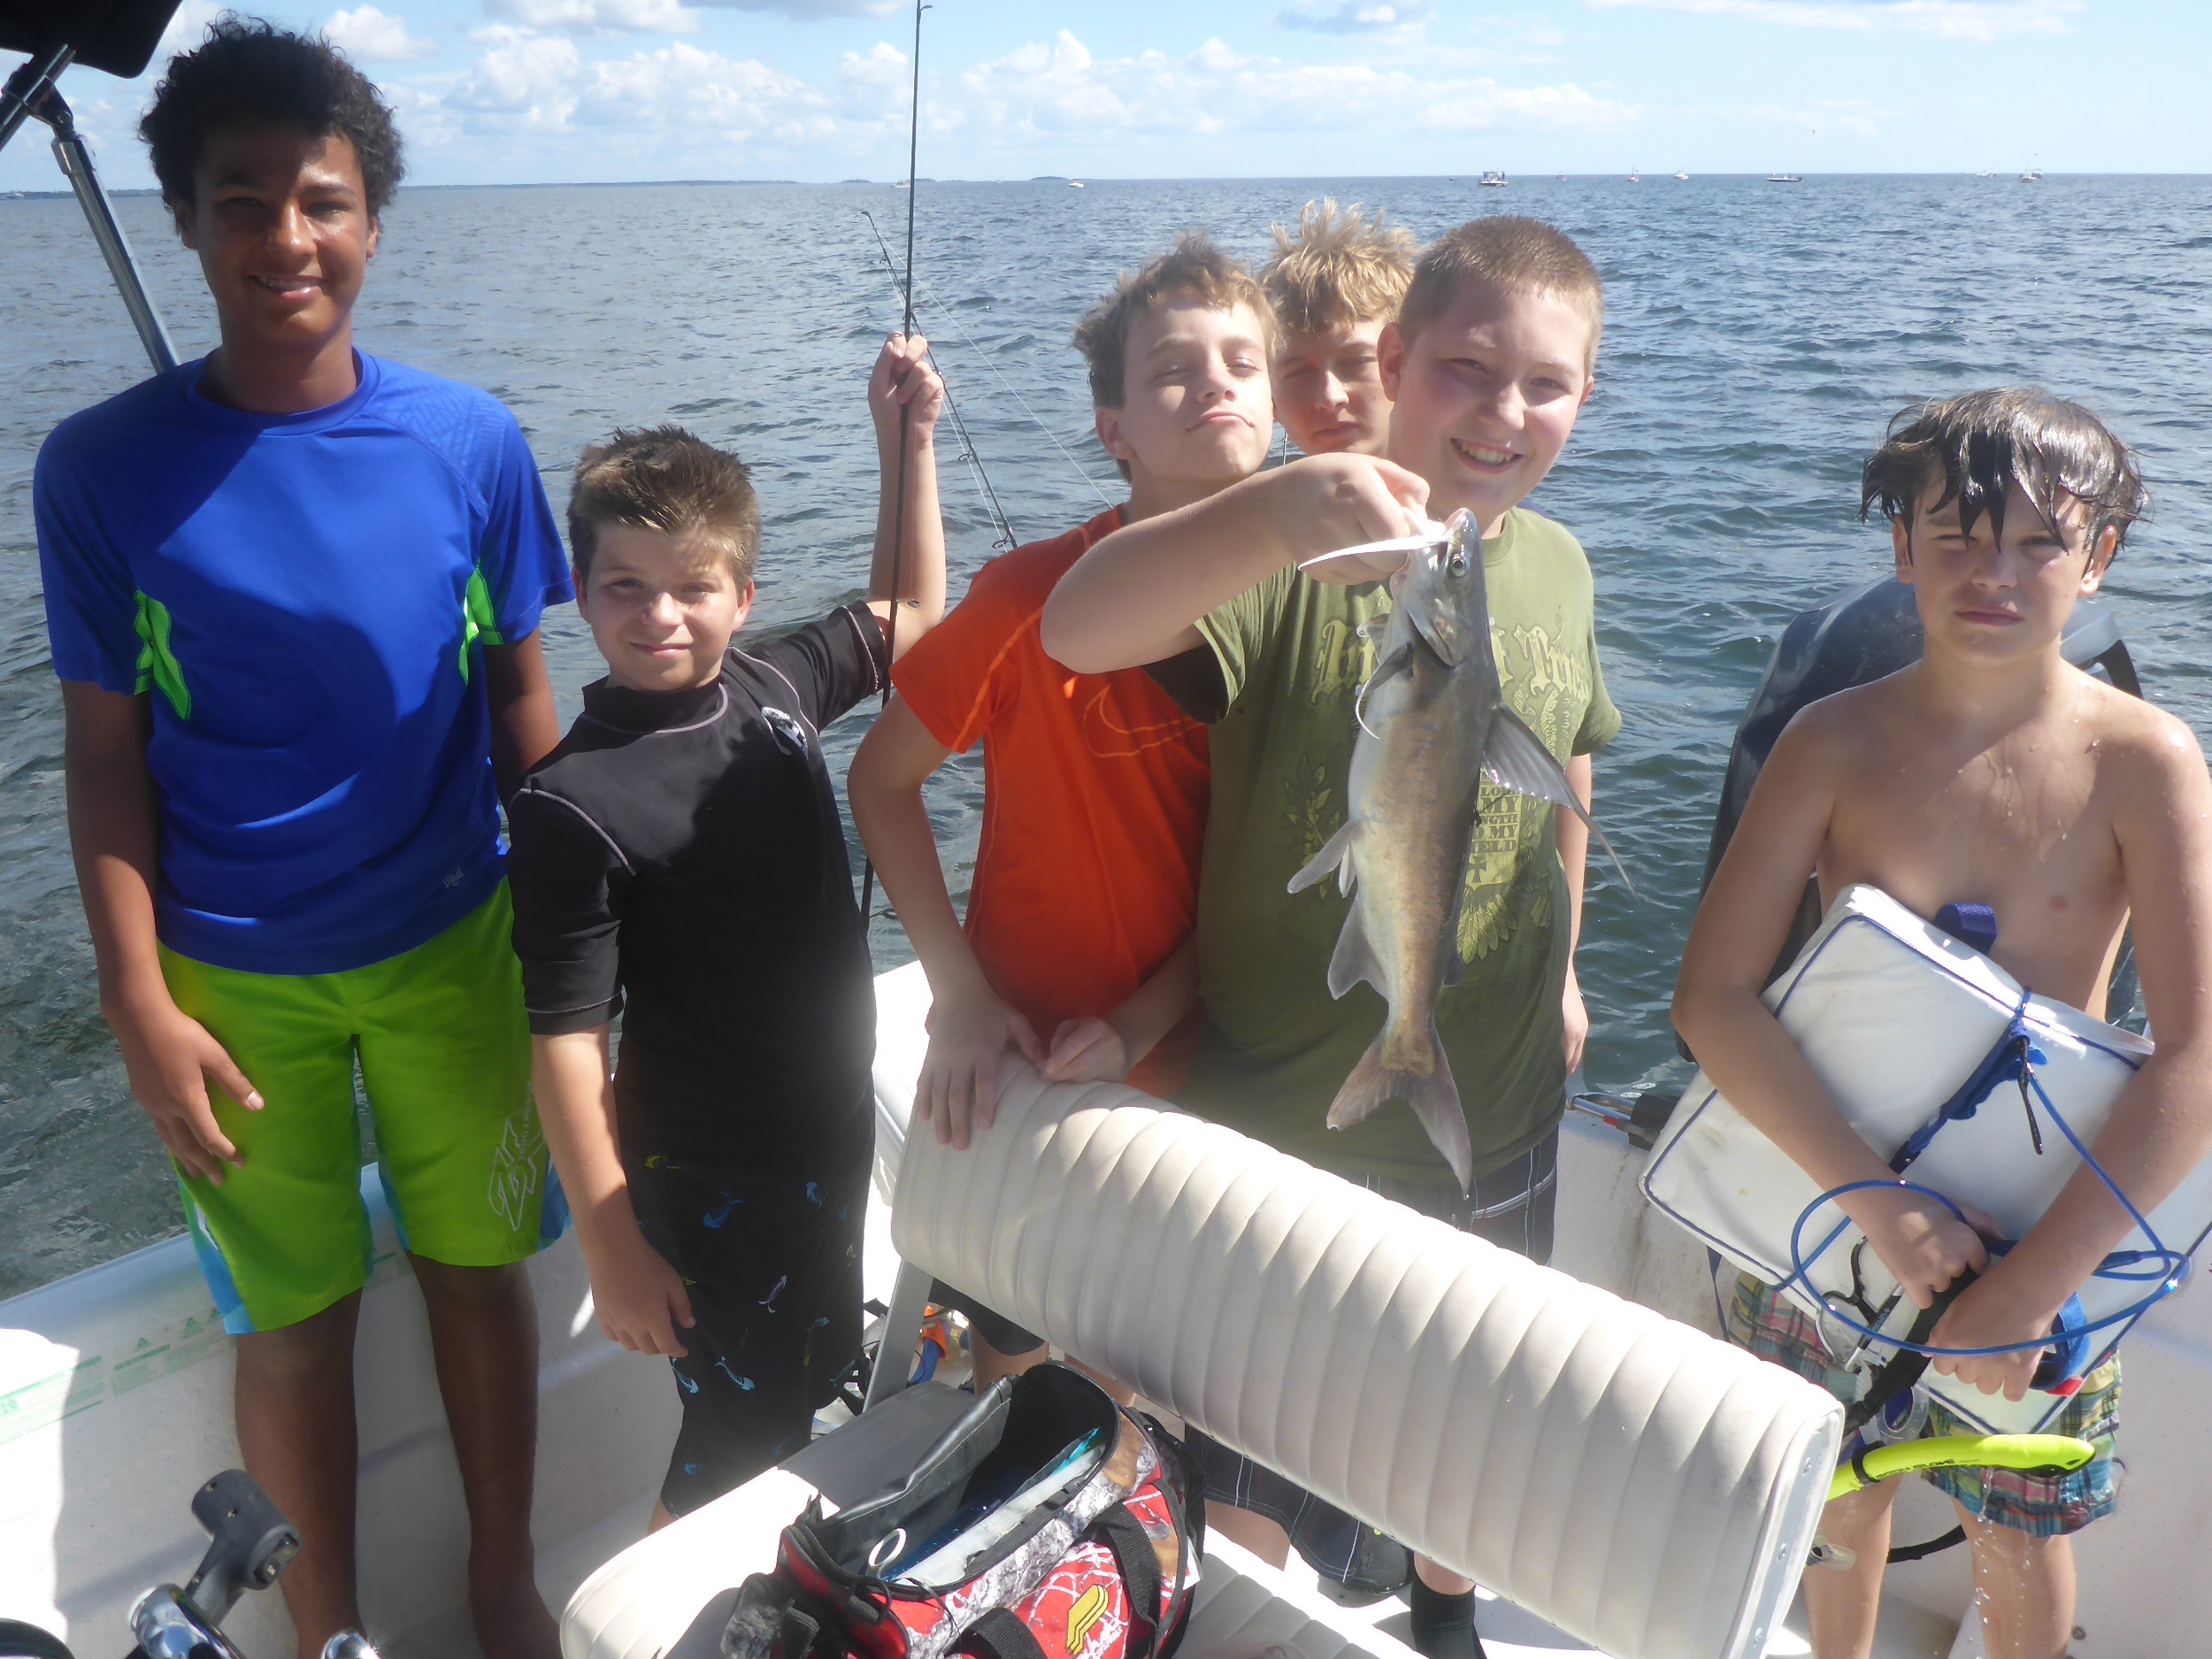 This team caught Gafftopsail catfish was one of the highlights of last weekend’s Boy Scout Troop 277 Scallop N’ Fishing campout. Plenty of fish were caught along with nearly 35 gallons of scallops caught between five different boats.
From left to right: Dominic Latzko, Connor Mordecai, Logan Pachever, David Minor, Joshua Bachochin and Harry O’Connor